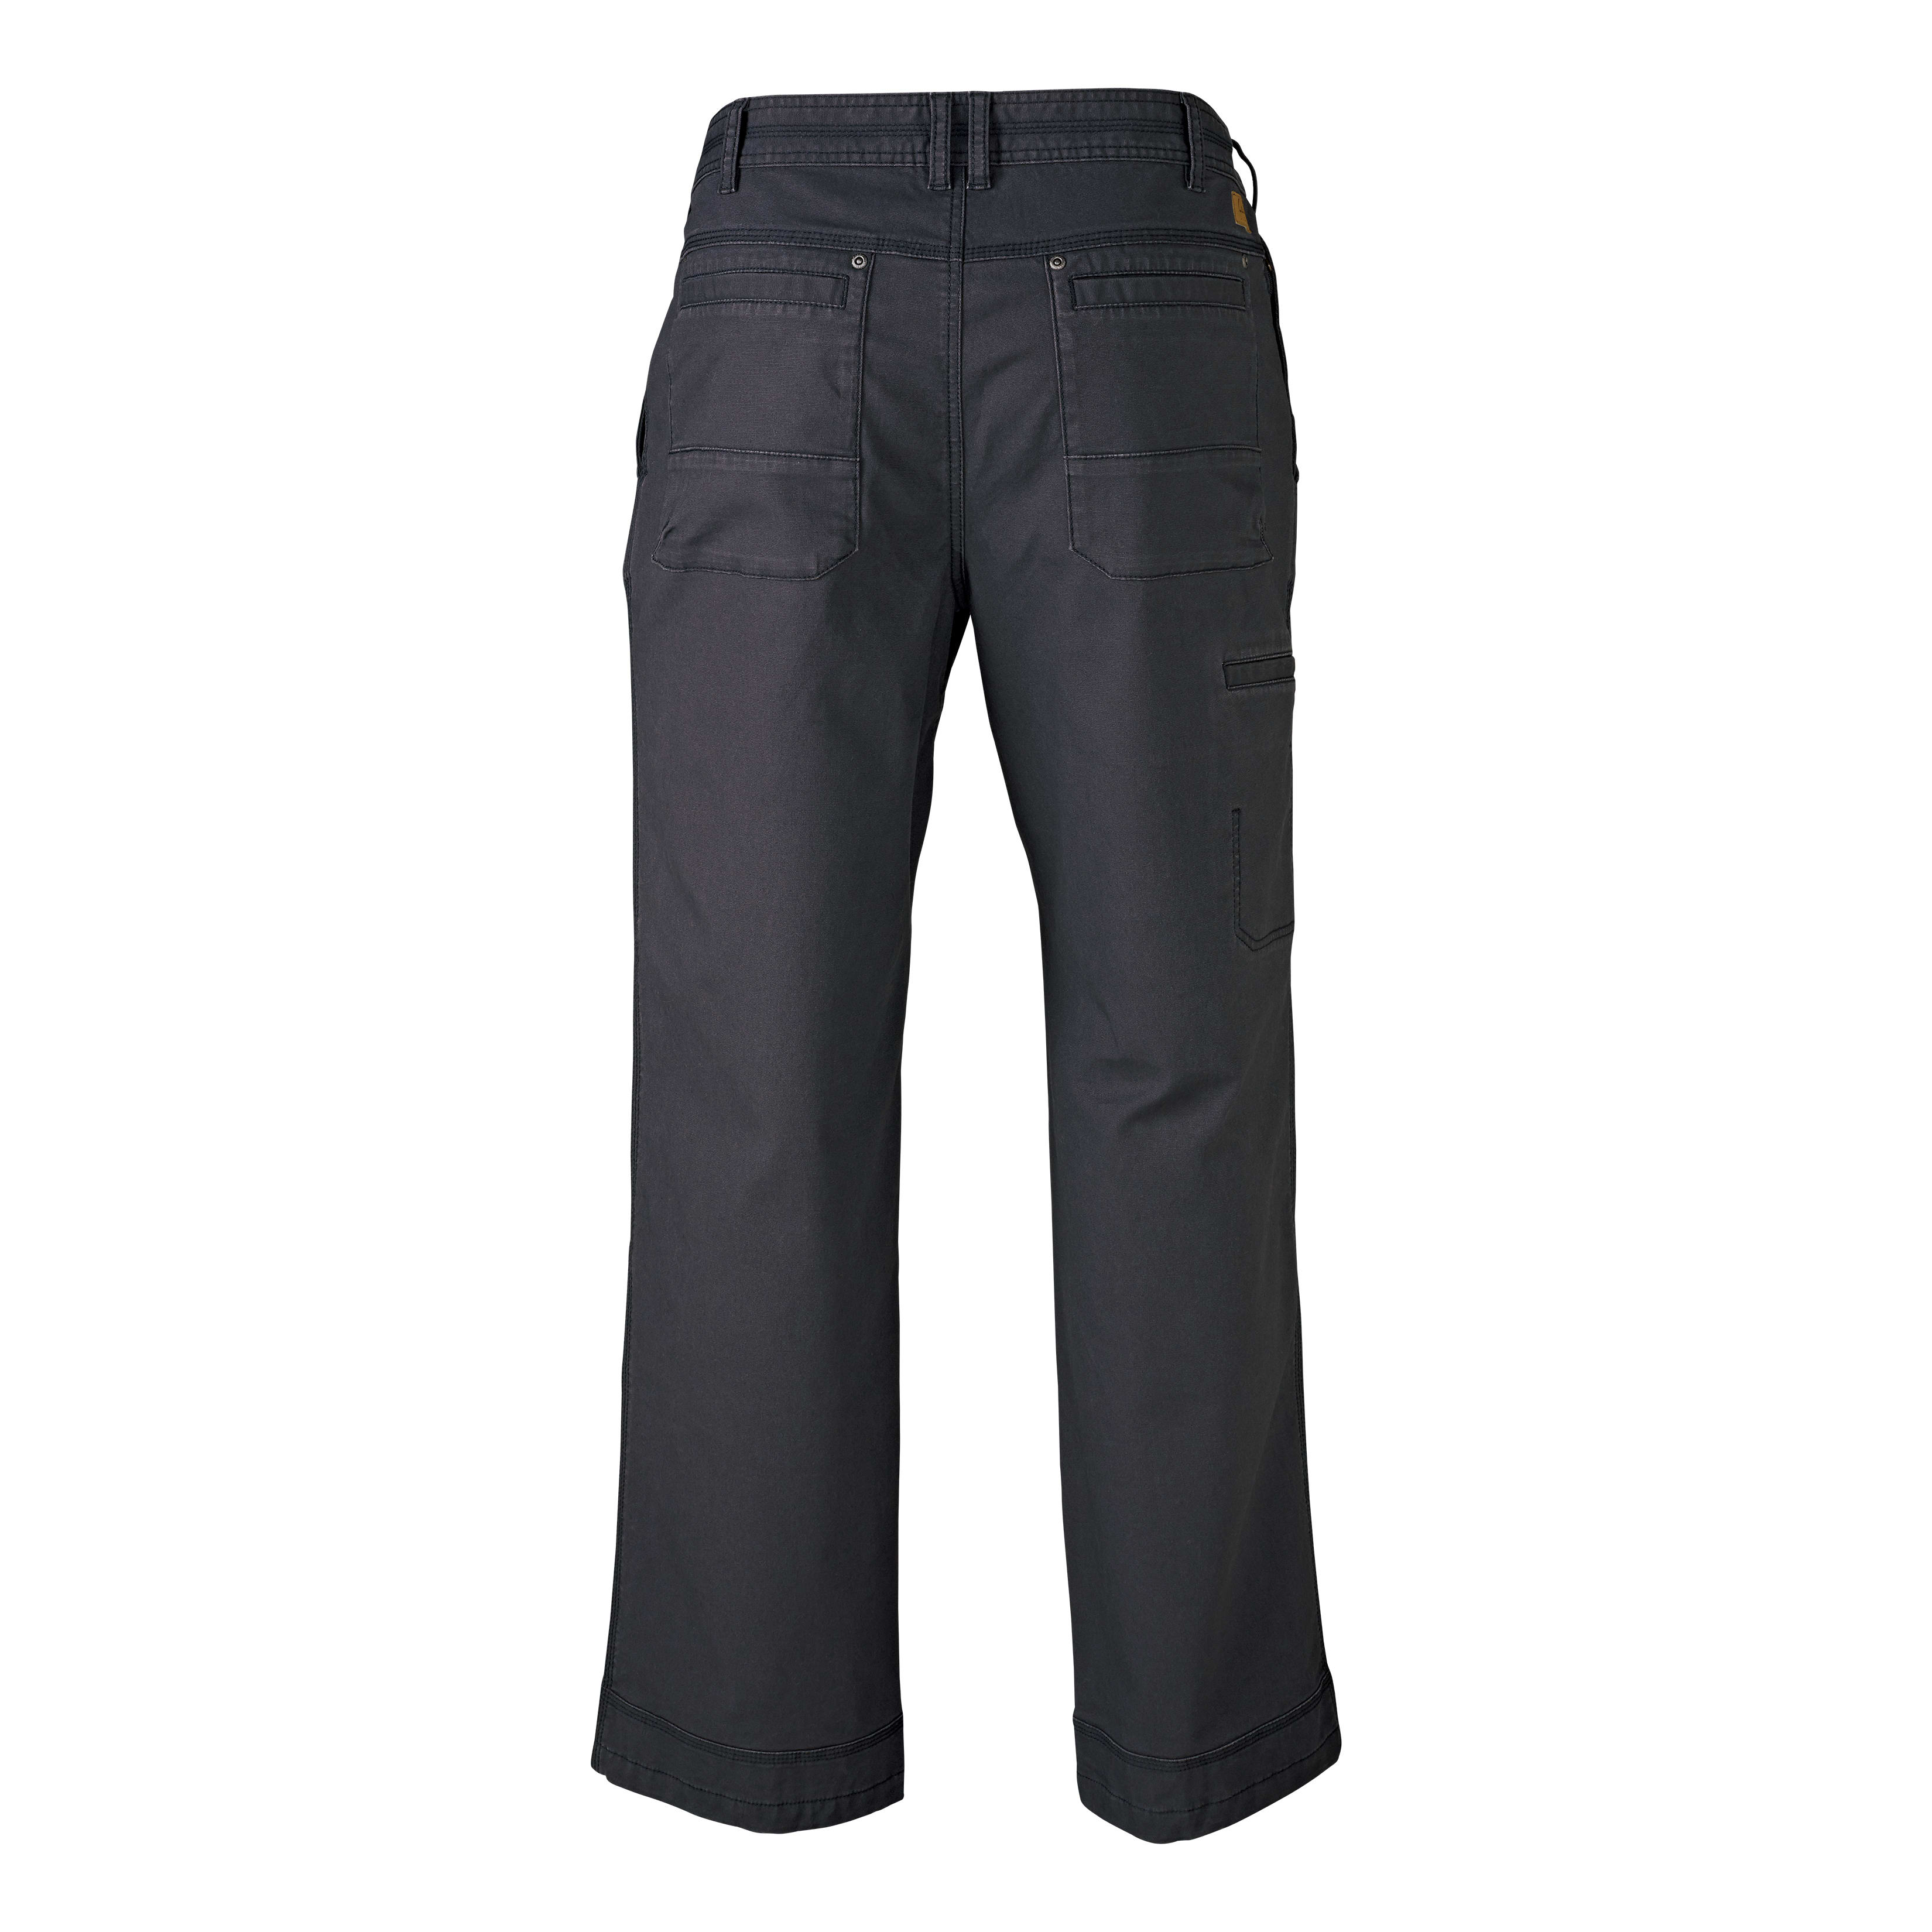 Cabela’s Ultimate Rugged Pants – 30” Inseam